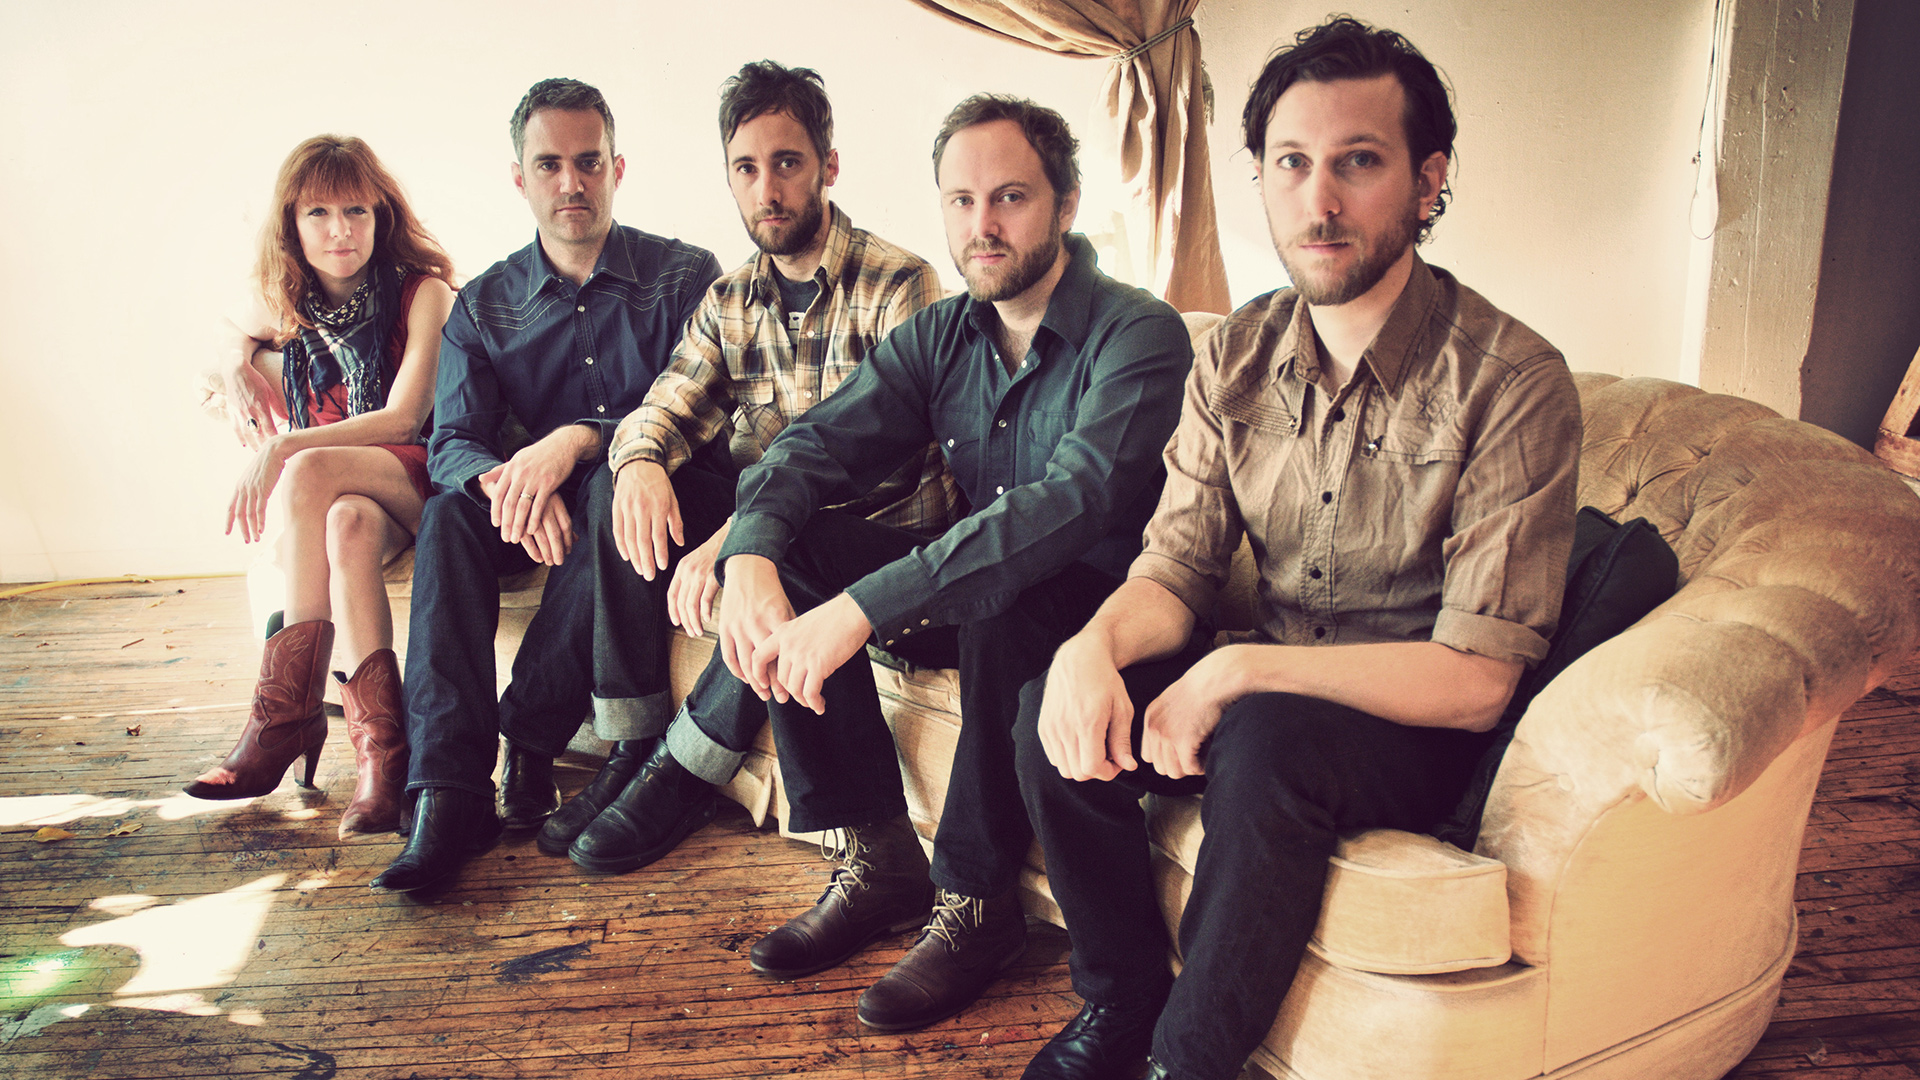 Great Lake Swimmers Wallpapers